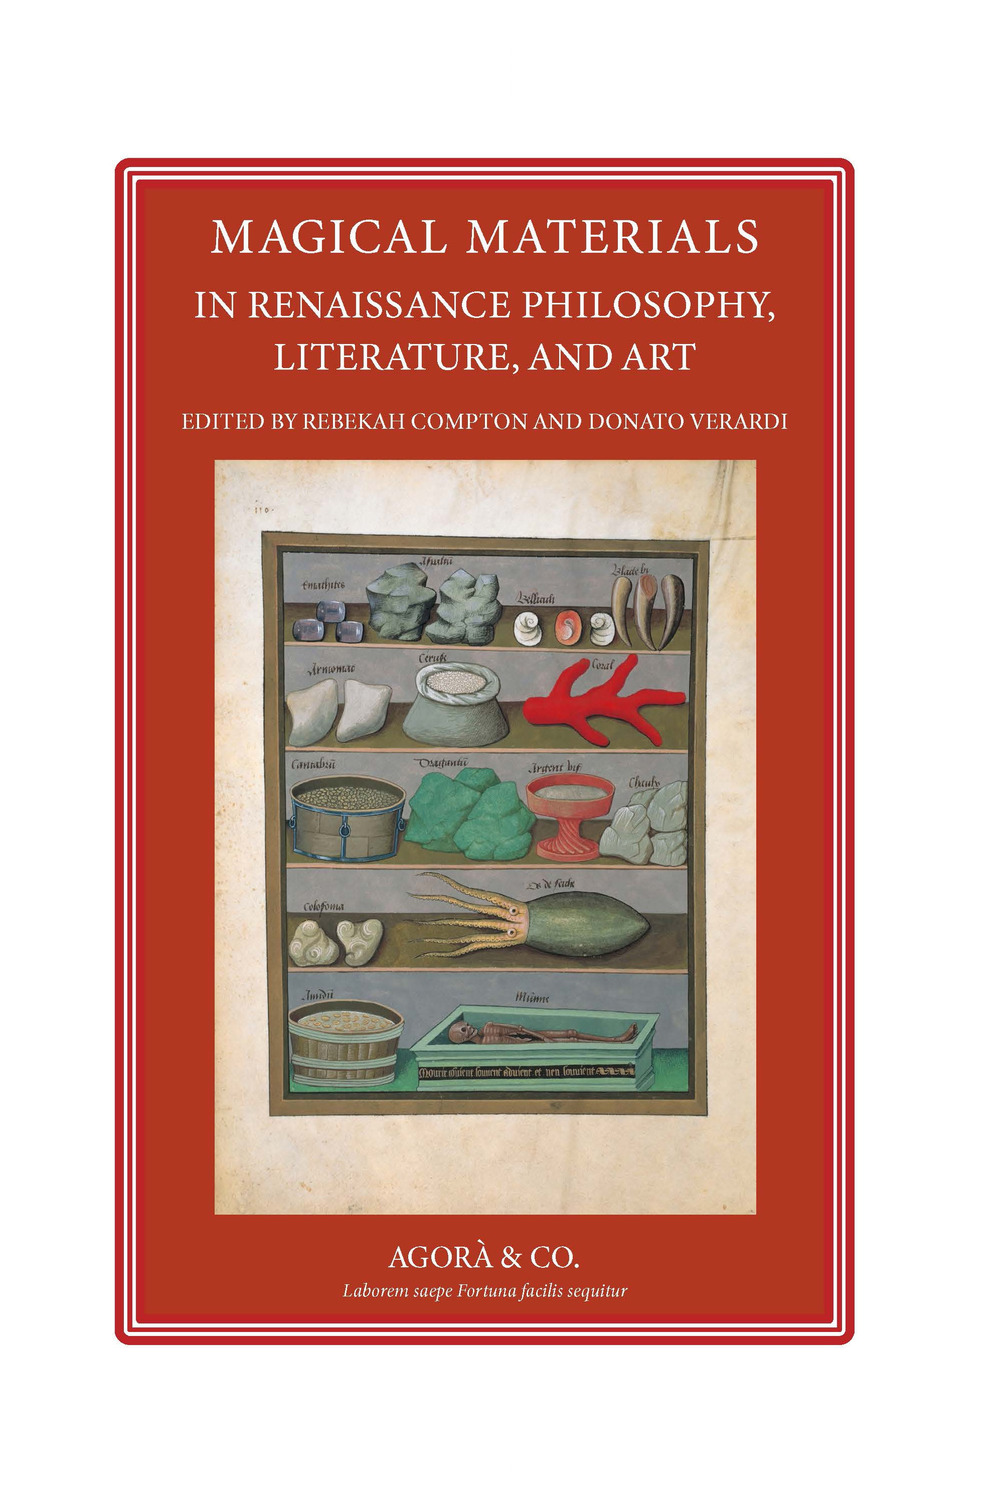 Magical materials in renaissance philosophy